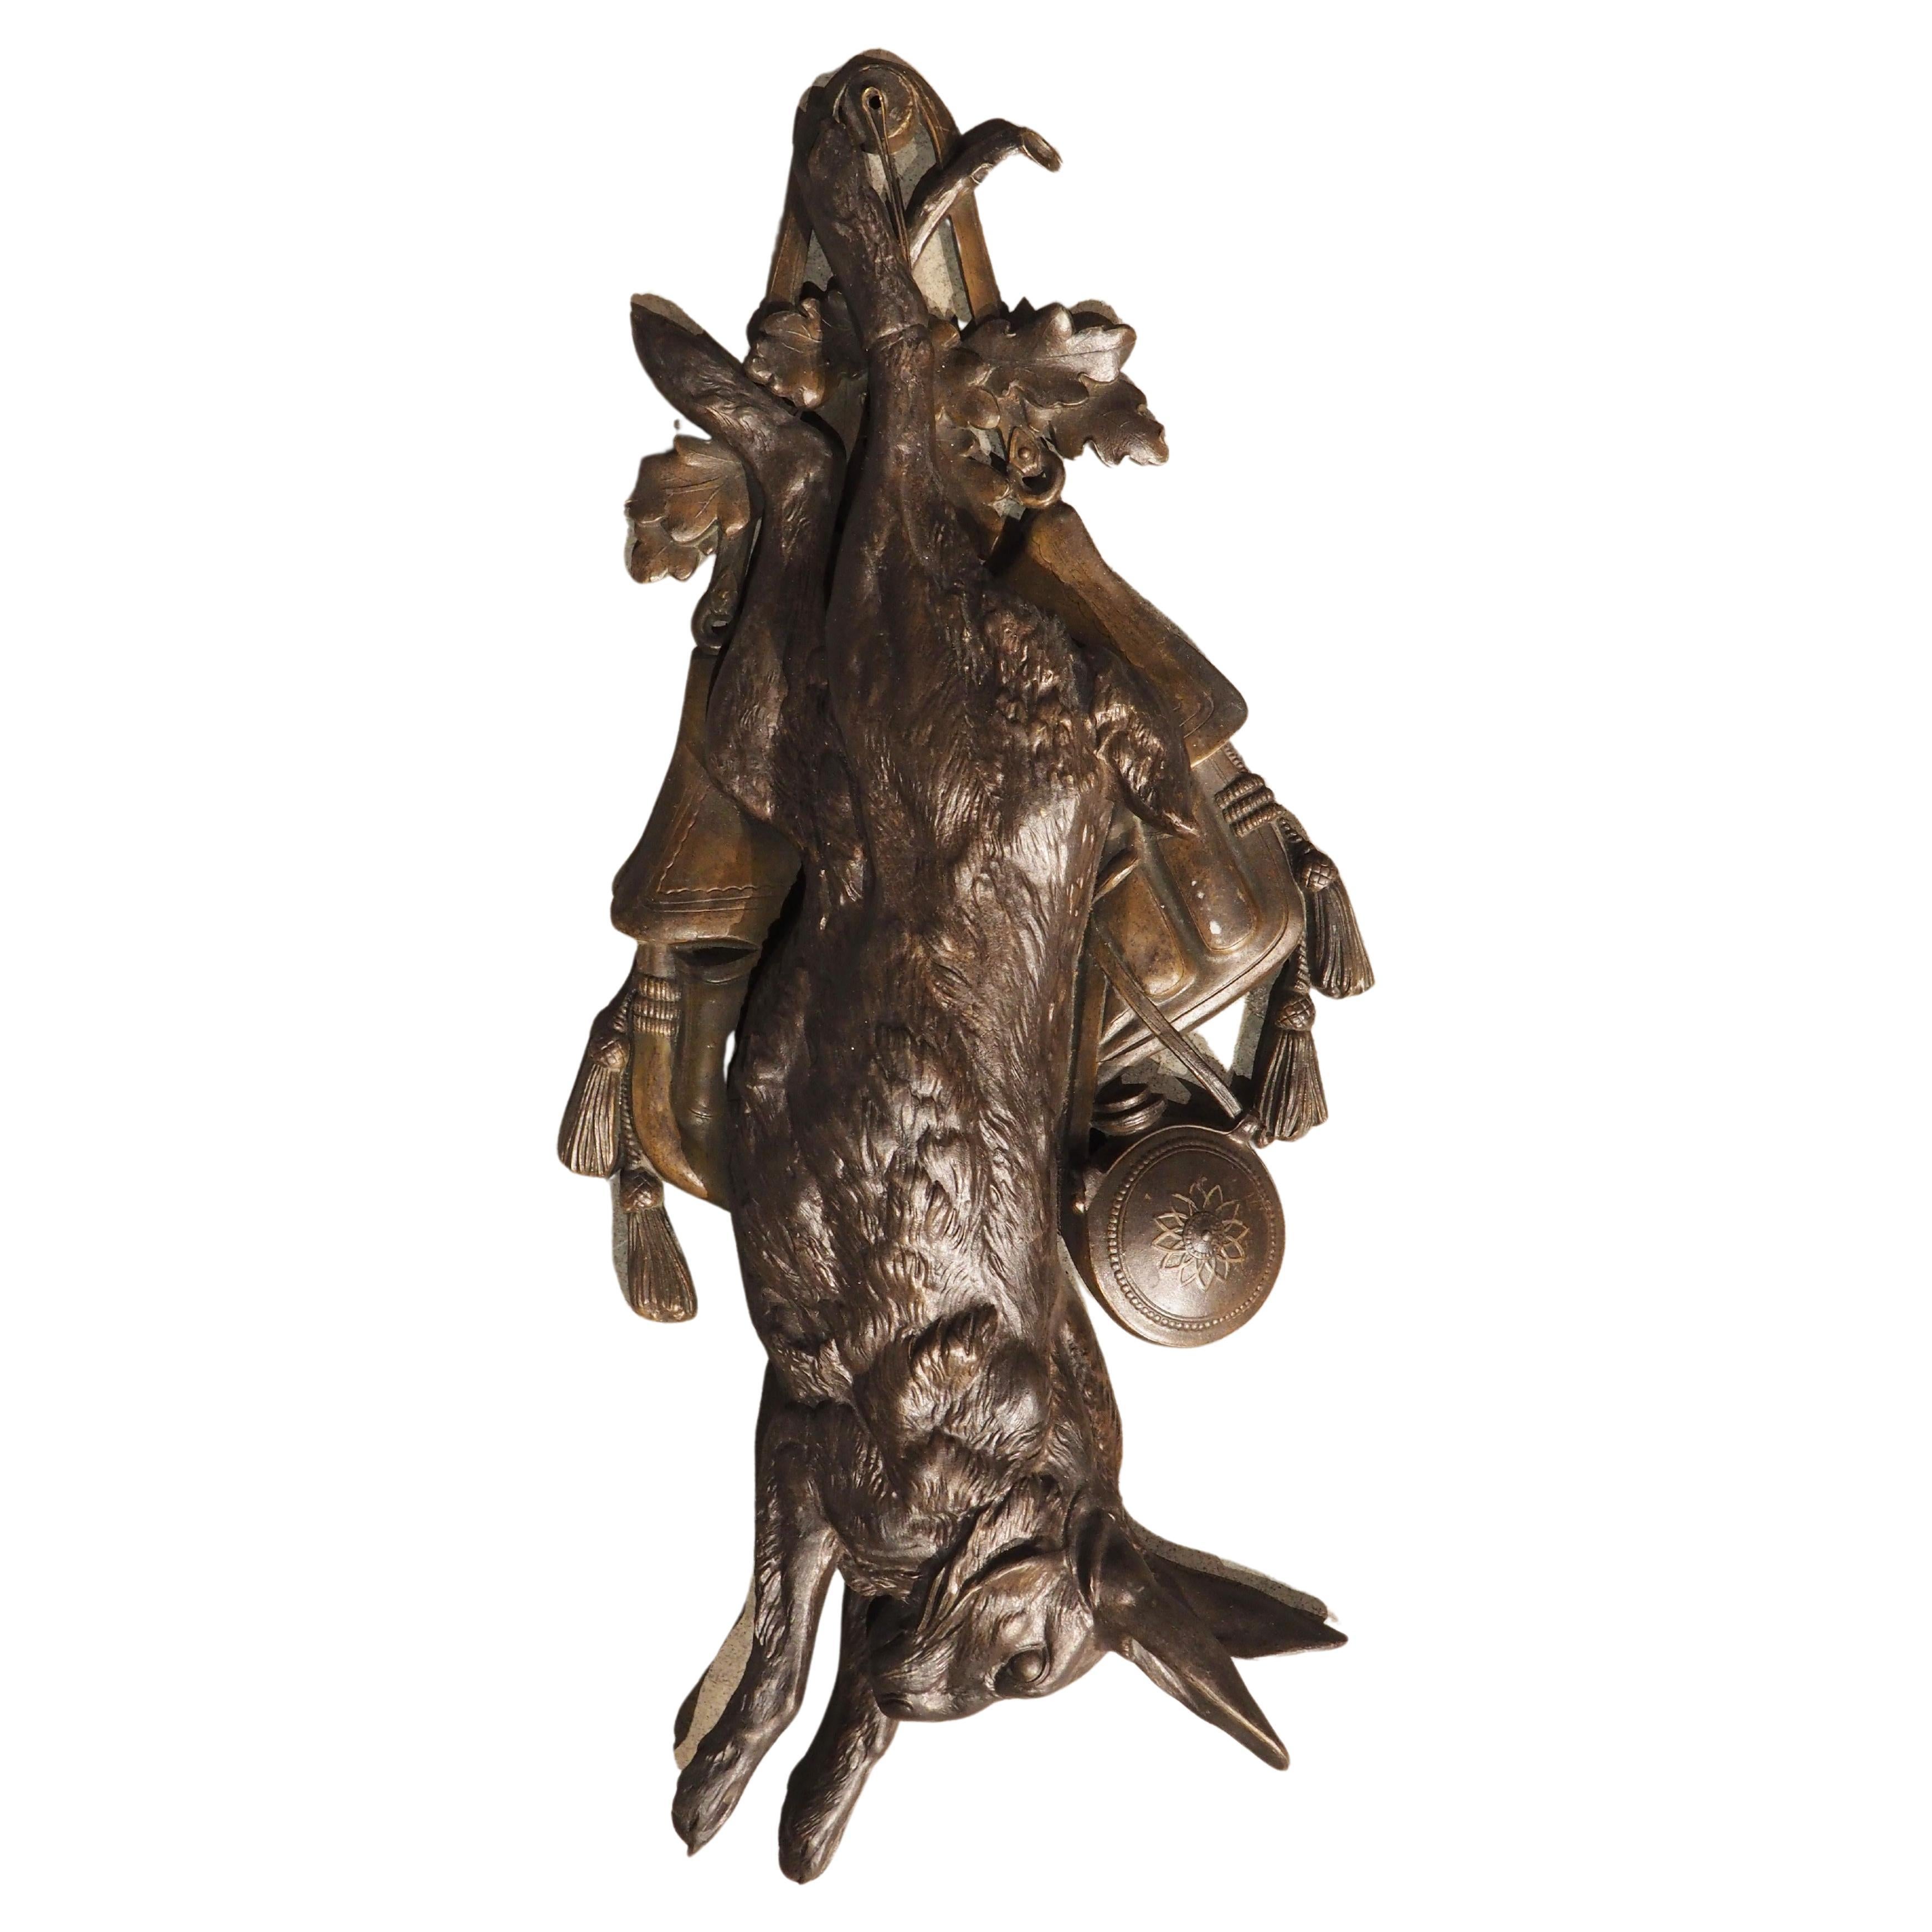 Circa 1890, French Bronze Hunt Trophy Wall Hanging of a Rabbit